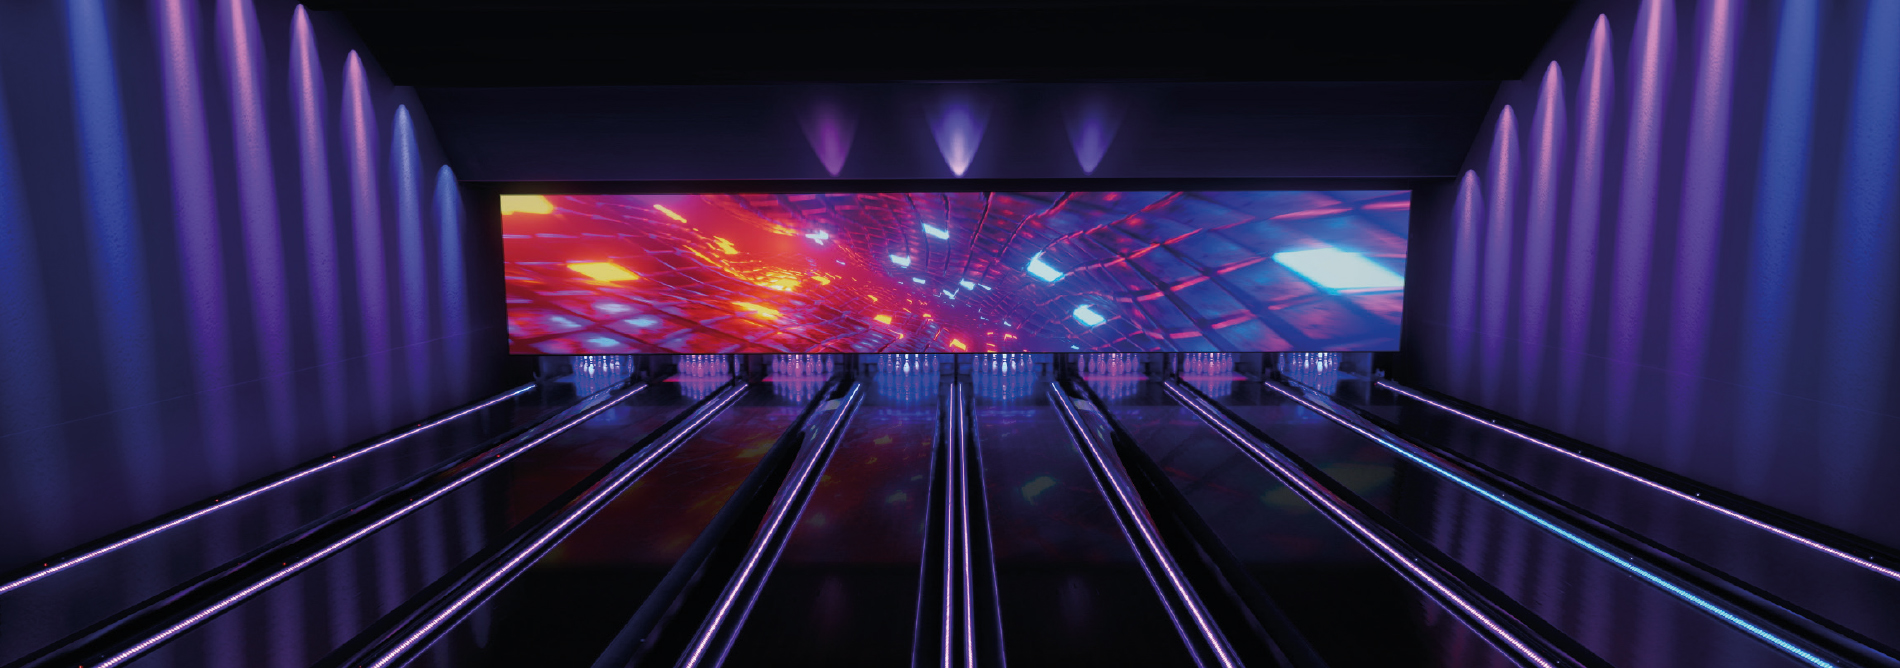 Bowling-QubicaAMF-NEOVERSE-video-wall-banner.jpg